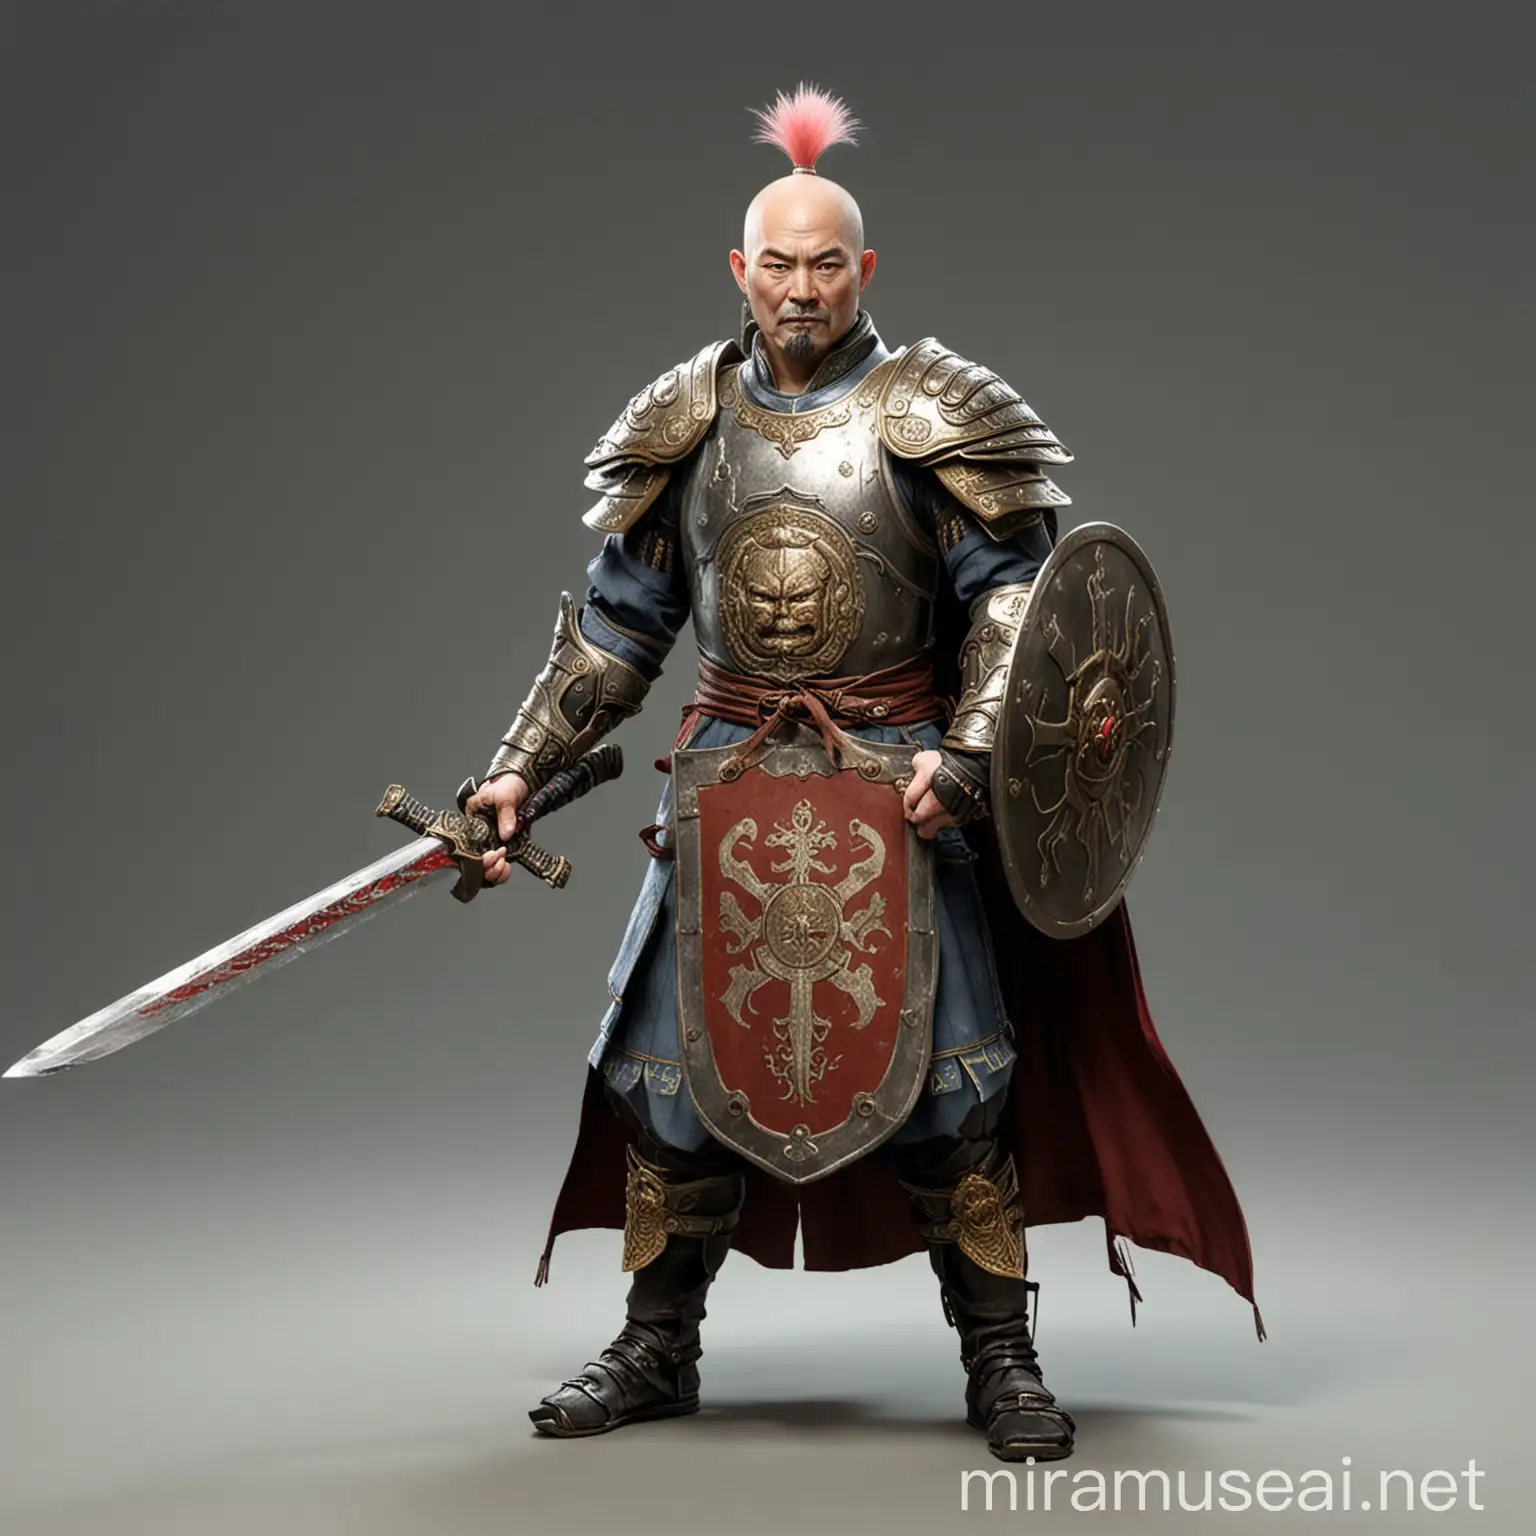 Humorous SemiBald Chinese Paladin with Sword and Shield